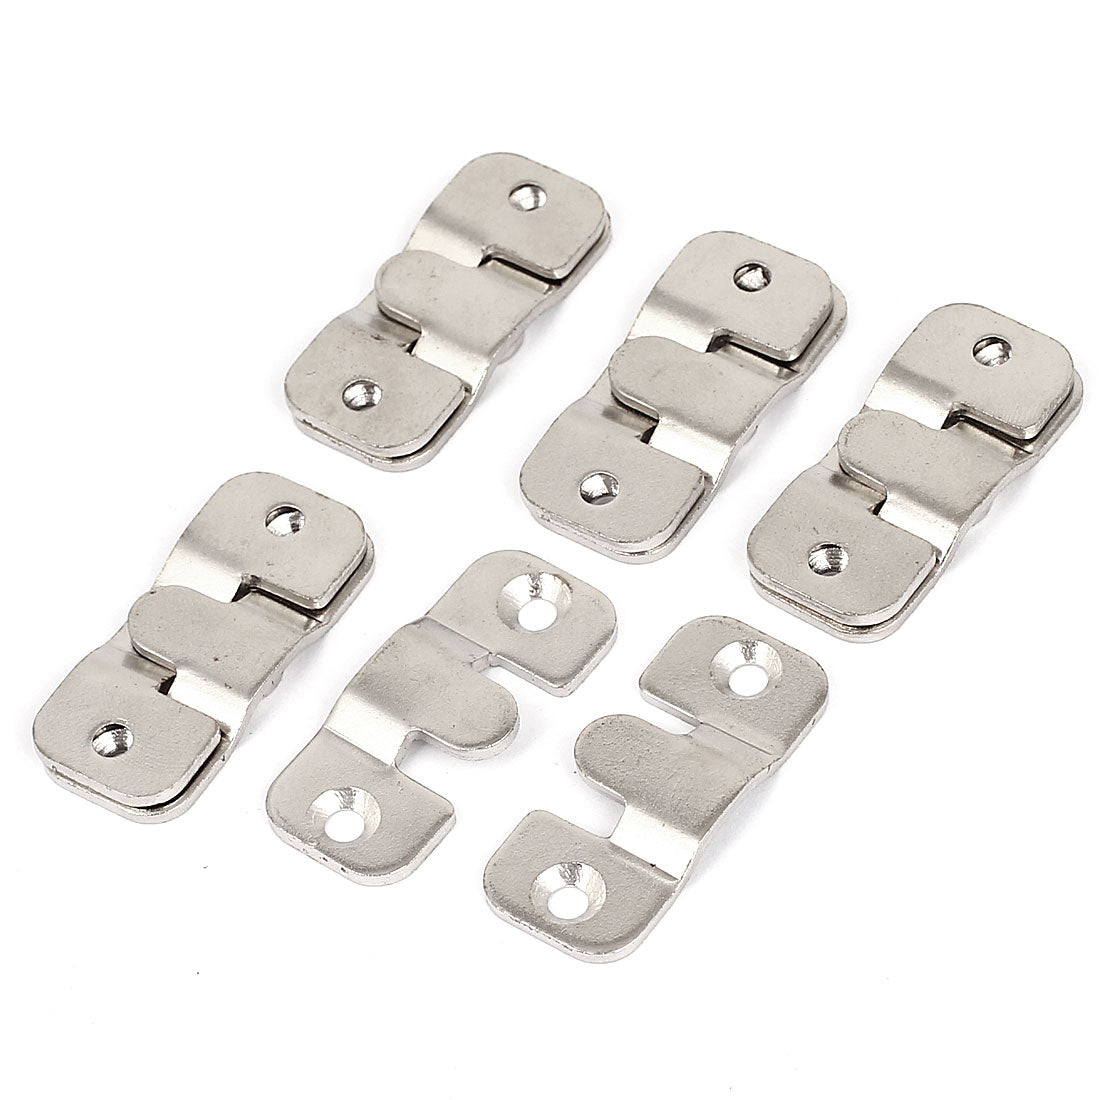 uxcell Uxcell Furniture Wooden Bed Rail Photo Frame E-Type Hanger Hook Plates Buckle 5set